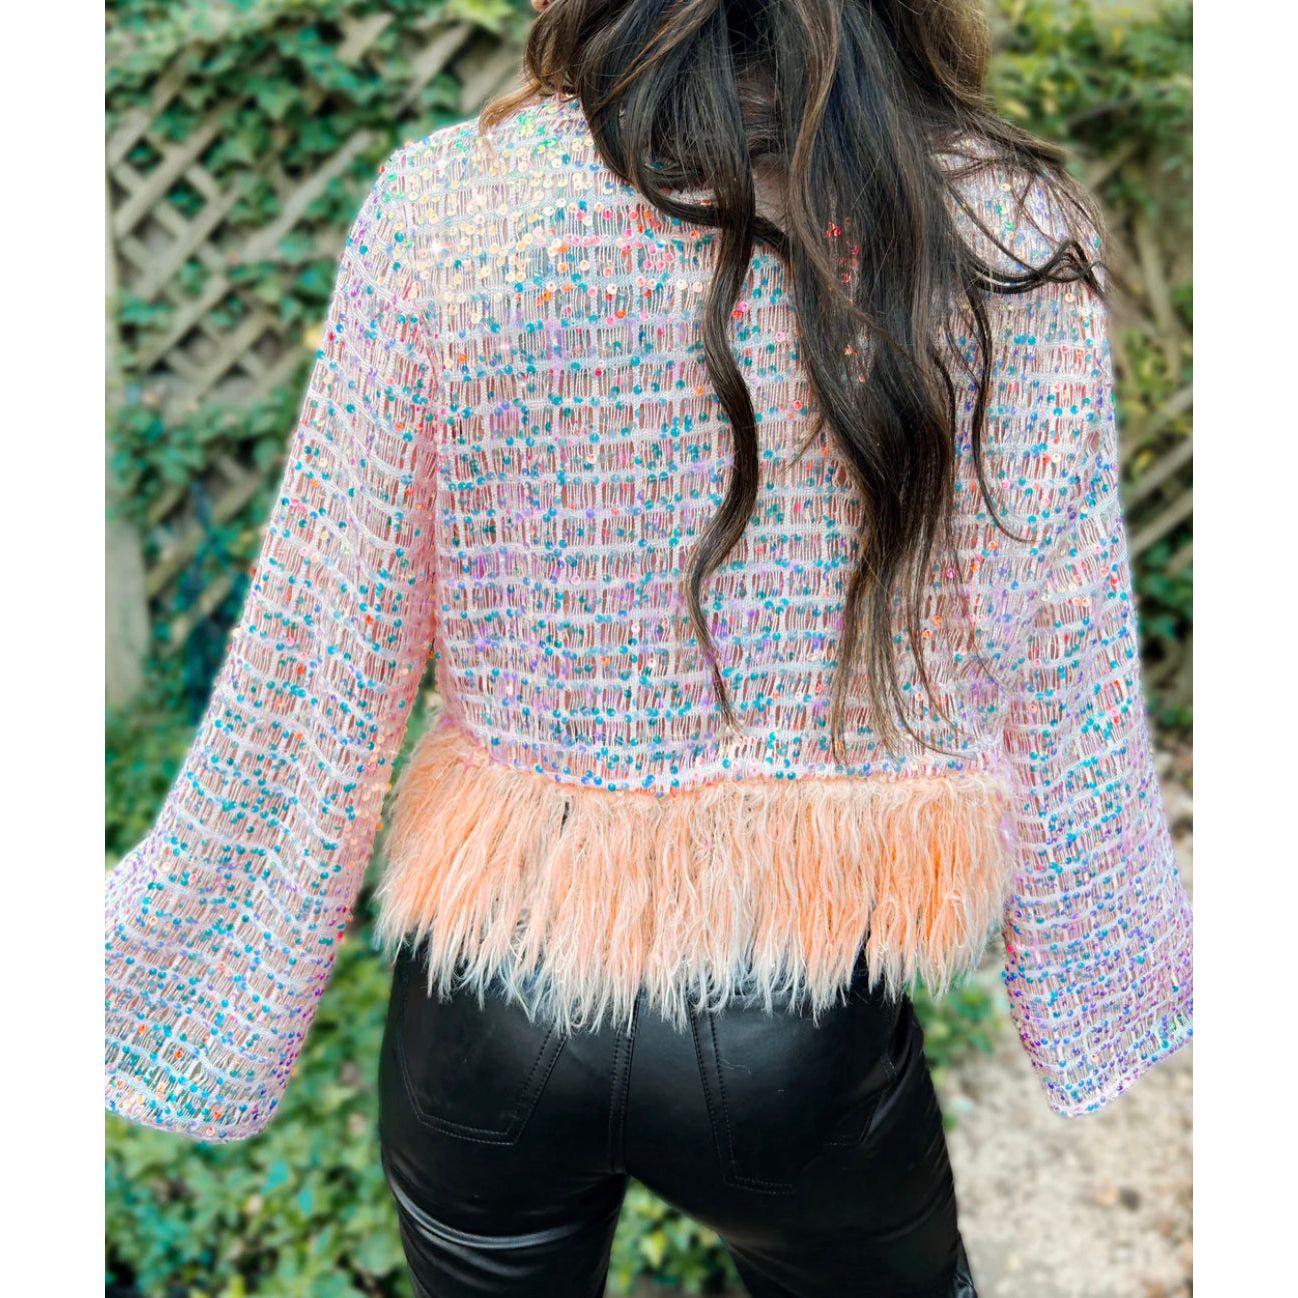 Starla Sequin & Feather Party Top